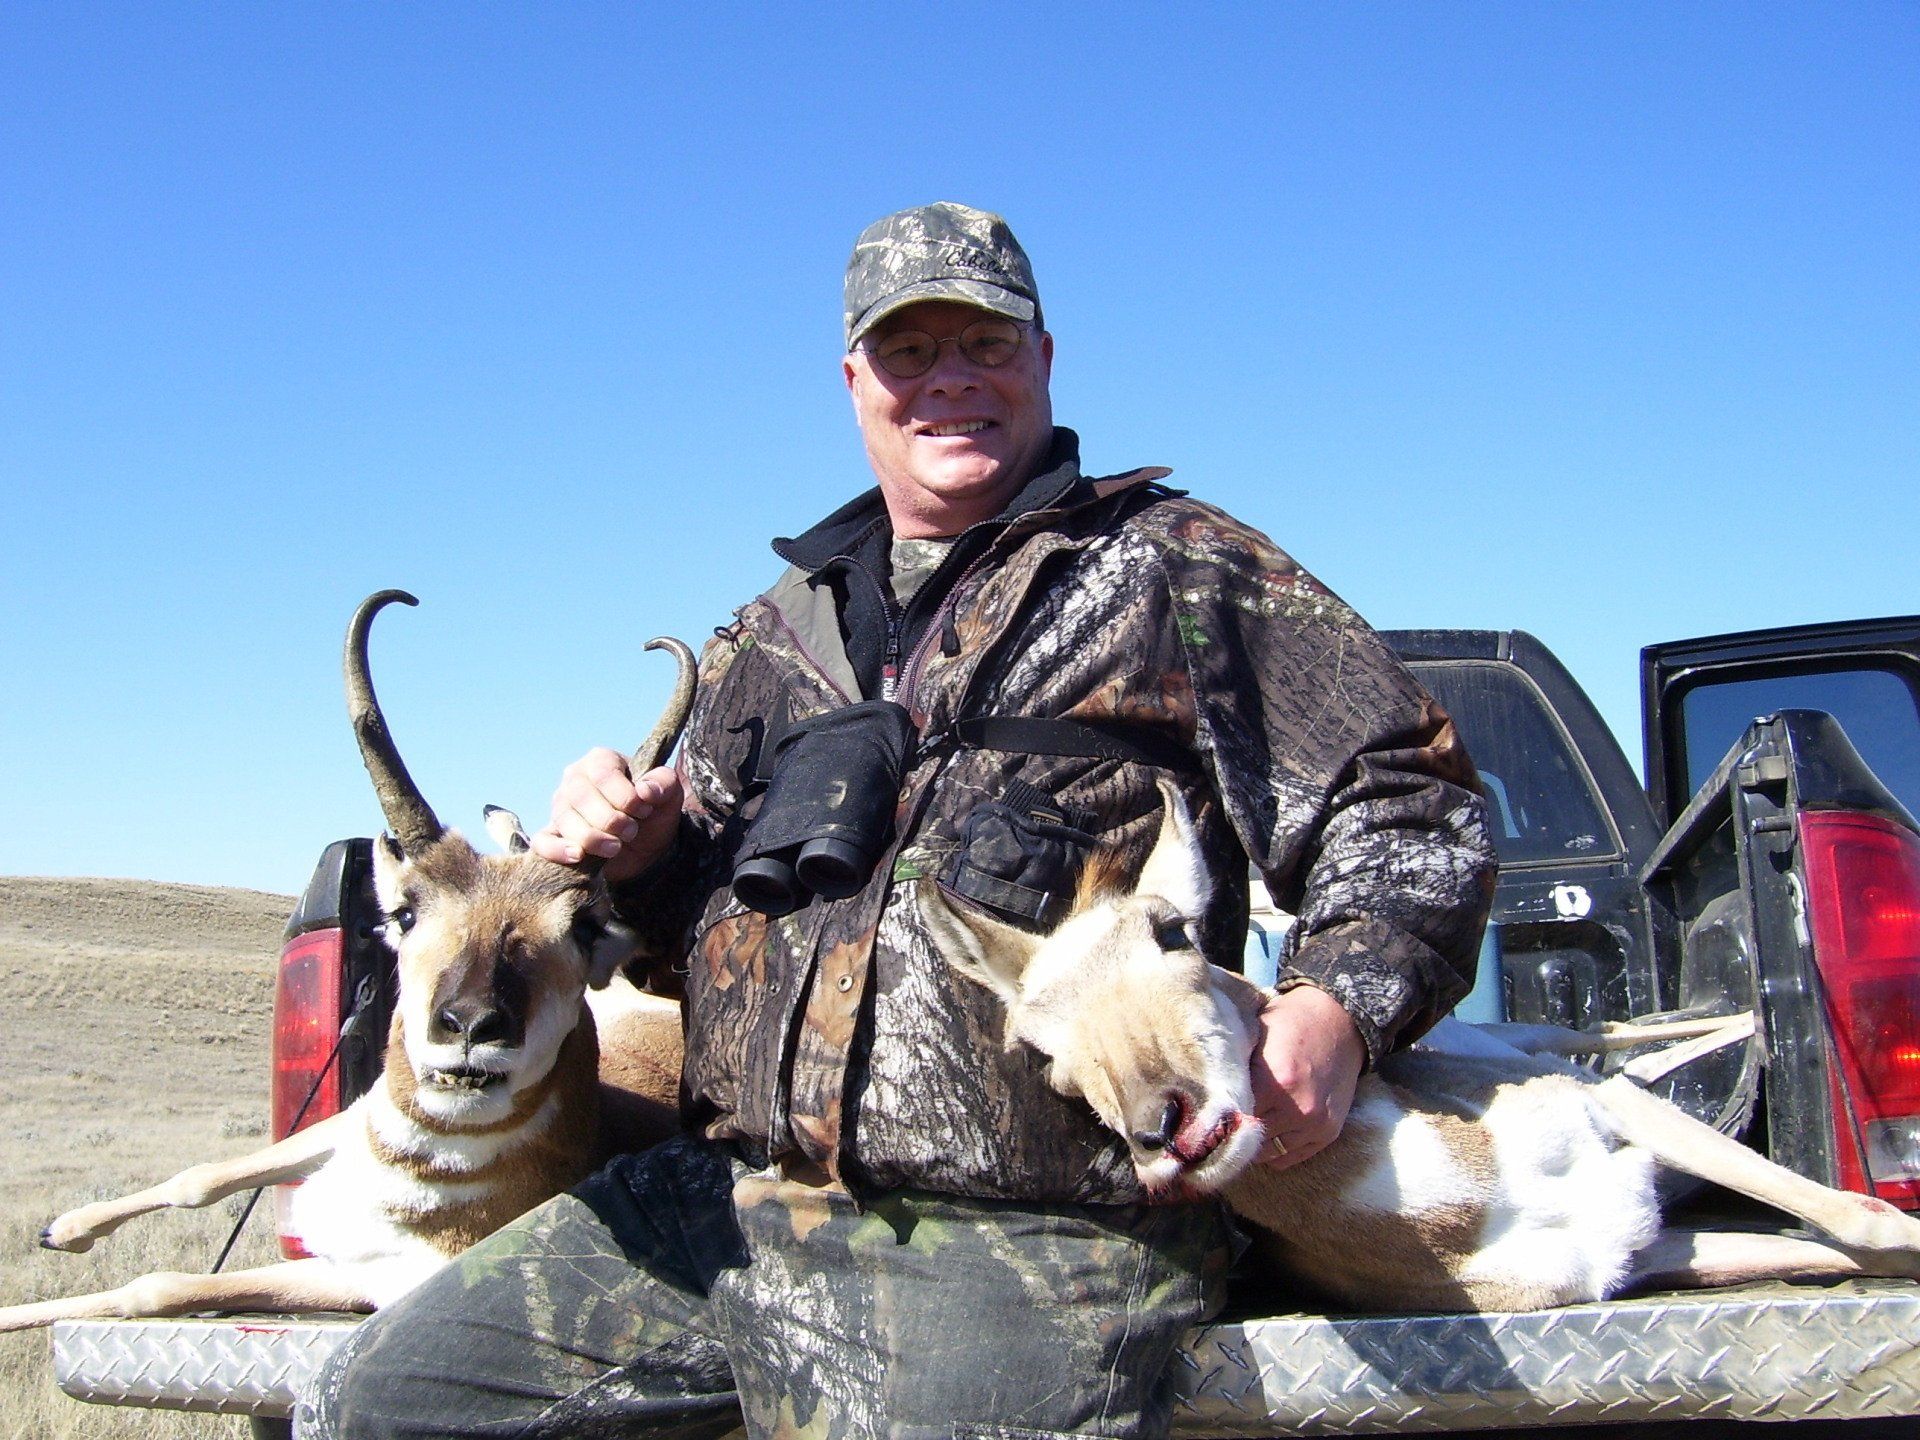 Antelope hunting eastern Montana, Antelope Hunt, Rick Wemple Outfitting, Outfitter, Guide